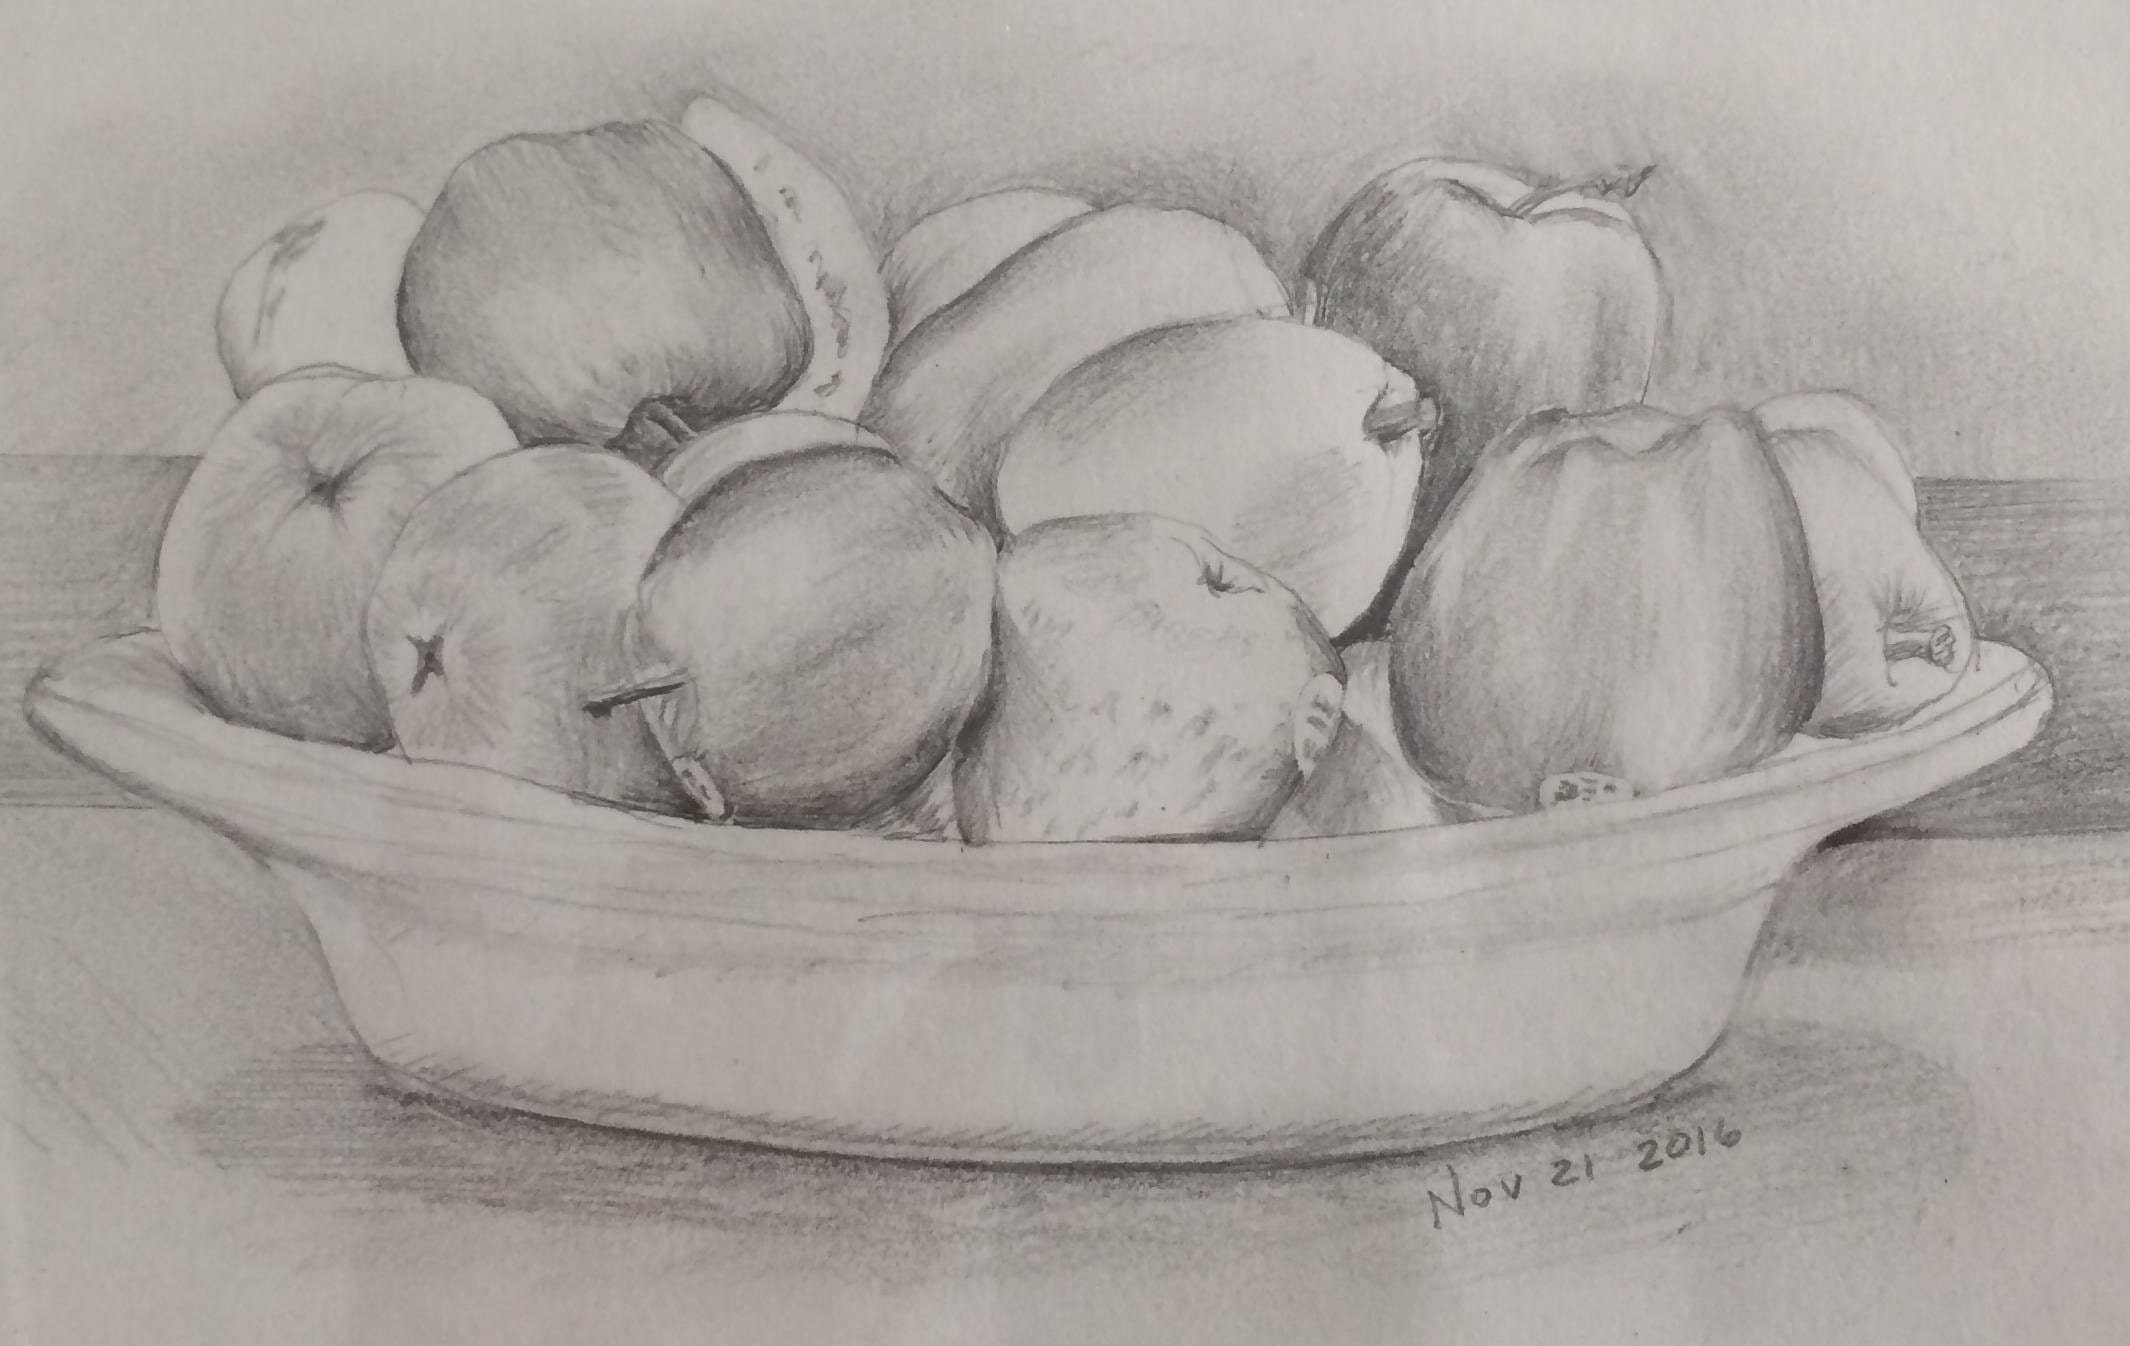 How to Draw a Fruit Bowl  Easy Drawing Tutorial For Kids